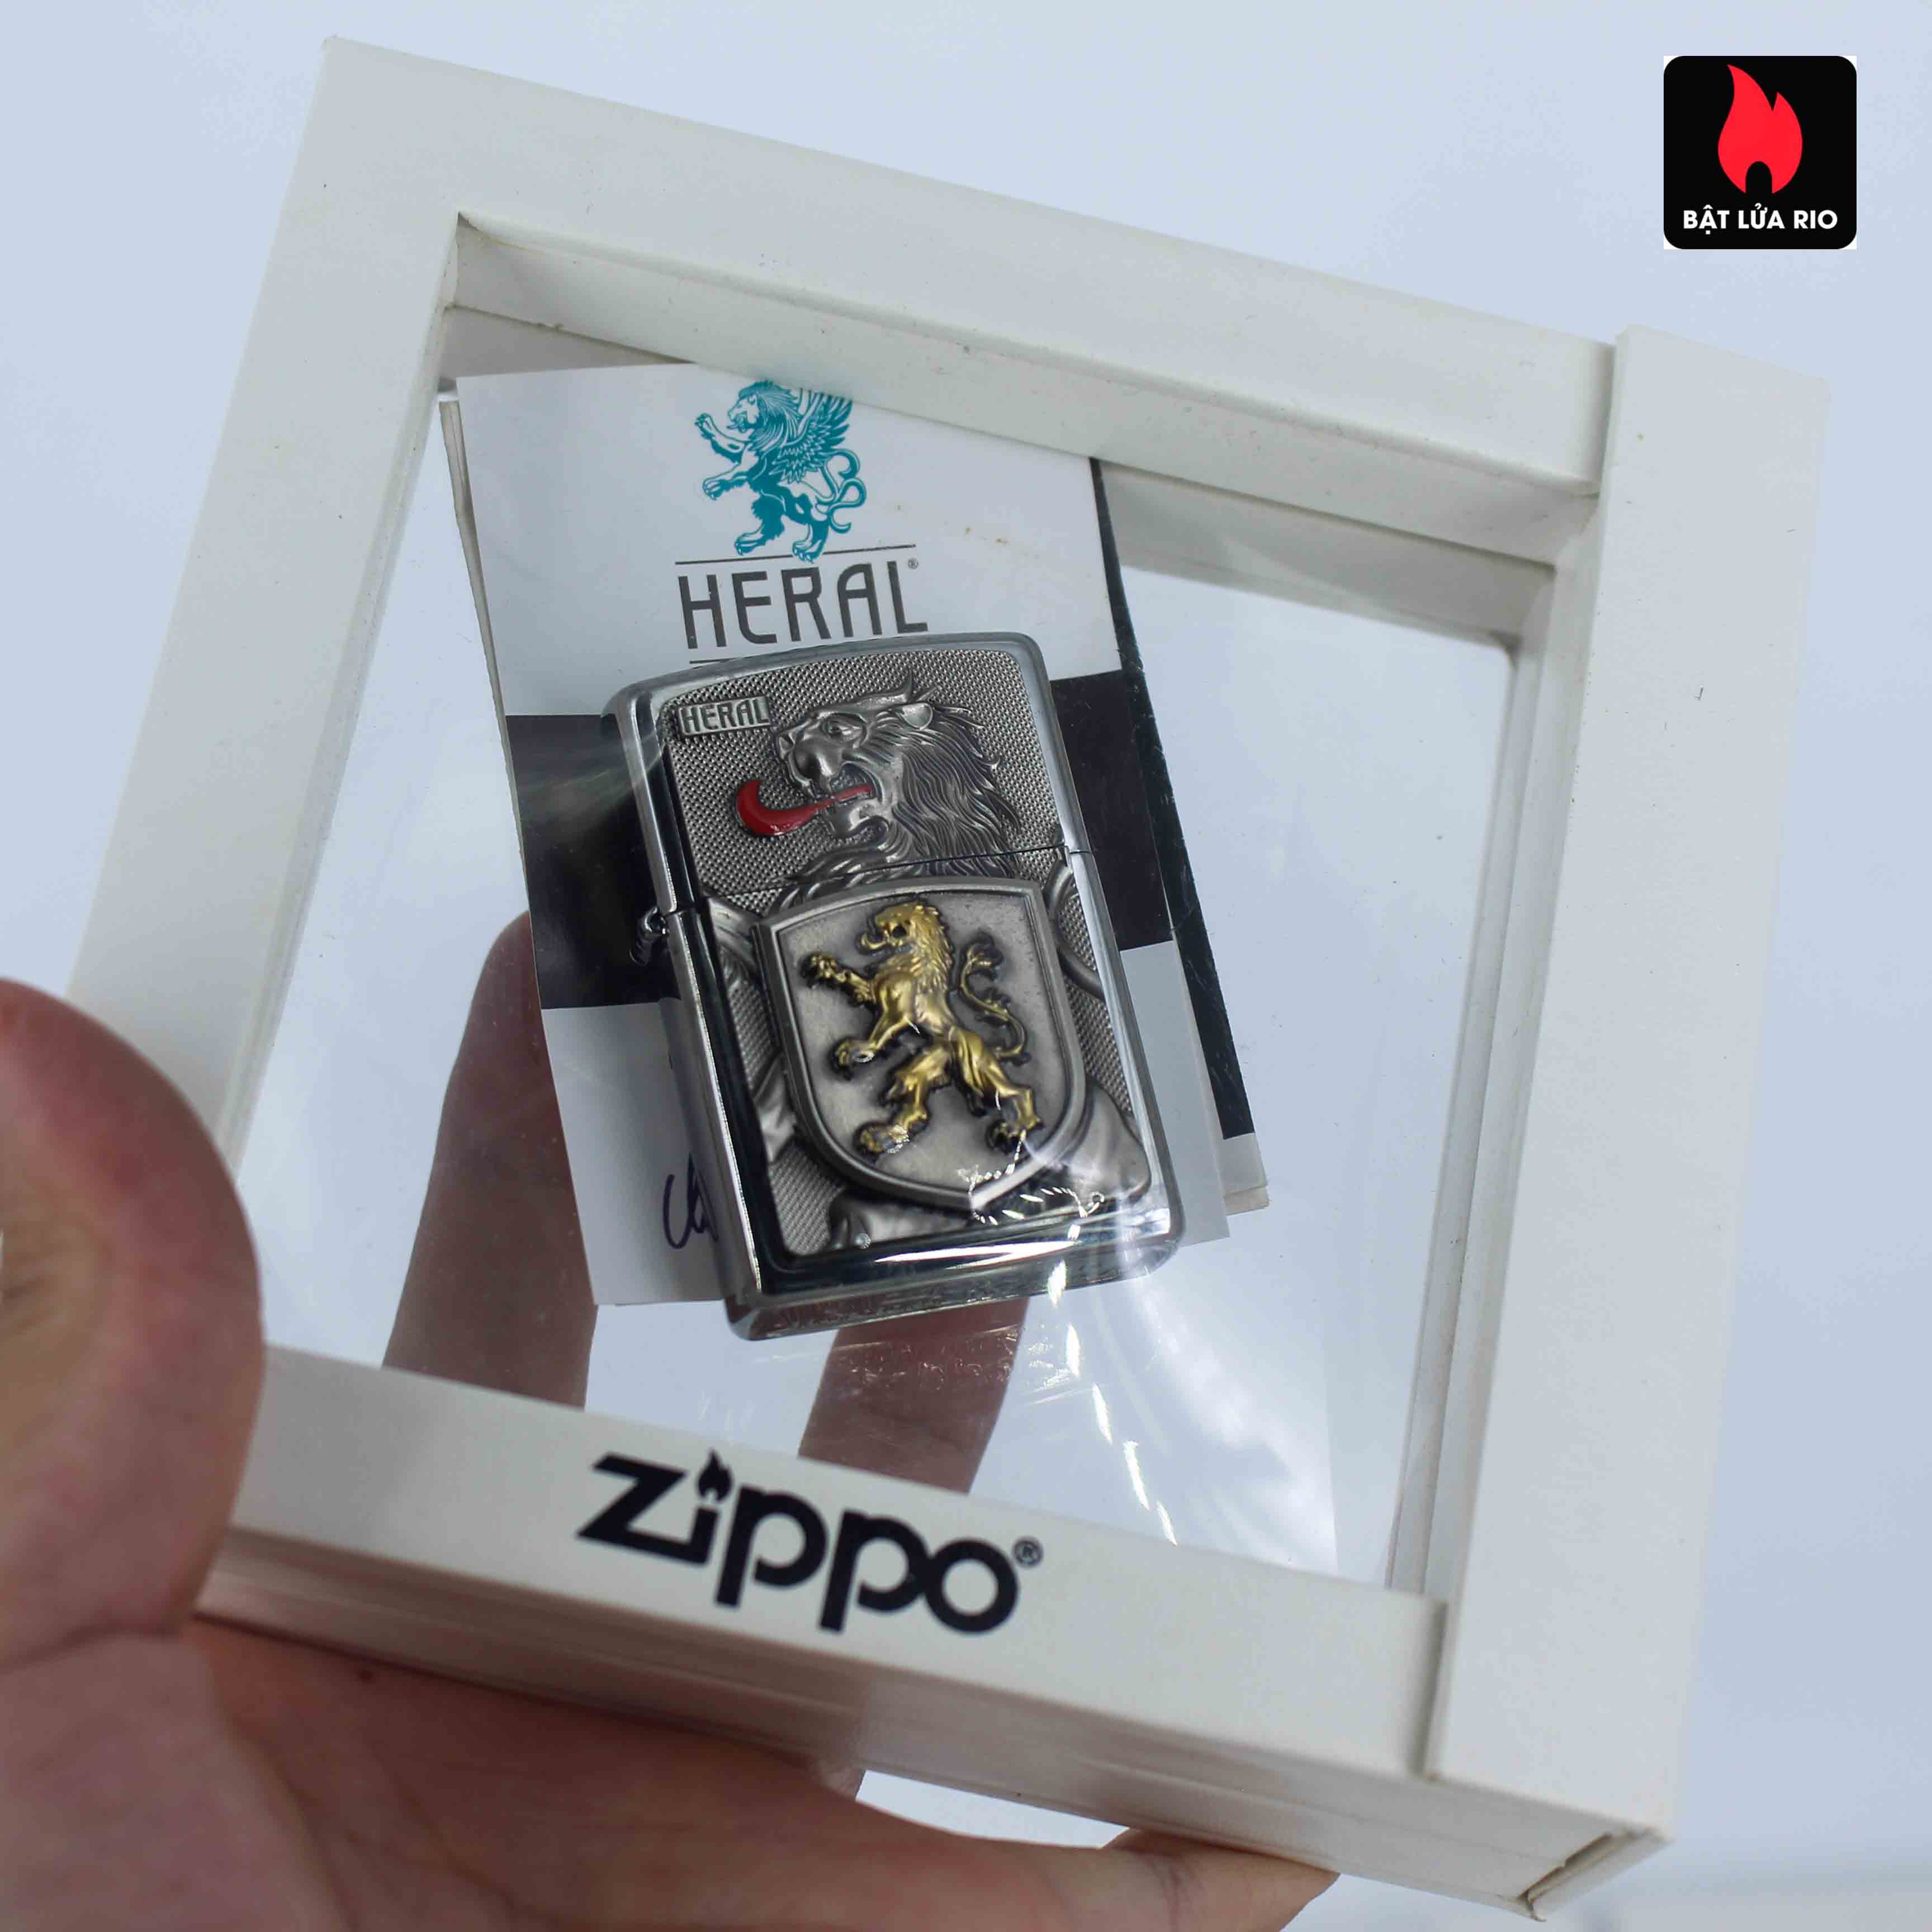 Zippo Set 2014 - Collectible Europe Animal Heral Arco Zippo Lighter Limited Edition 3